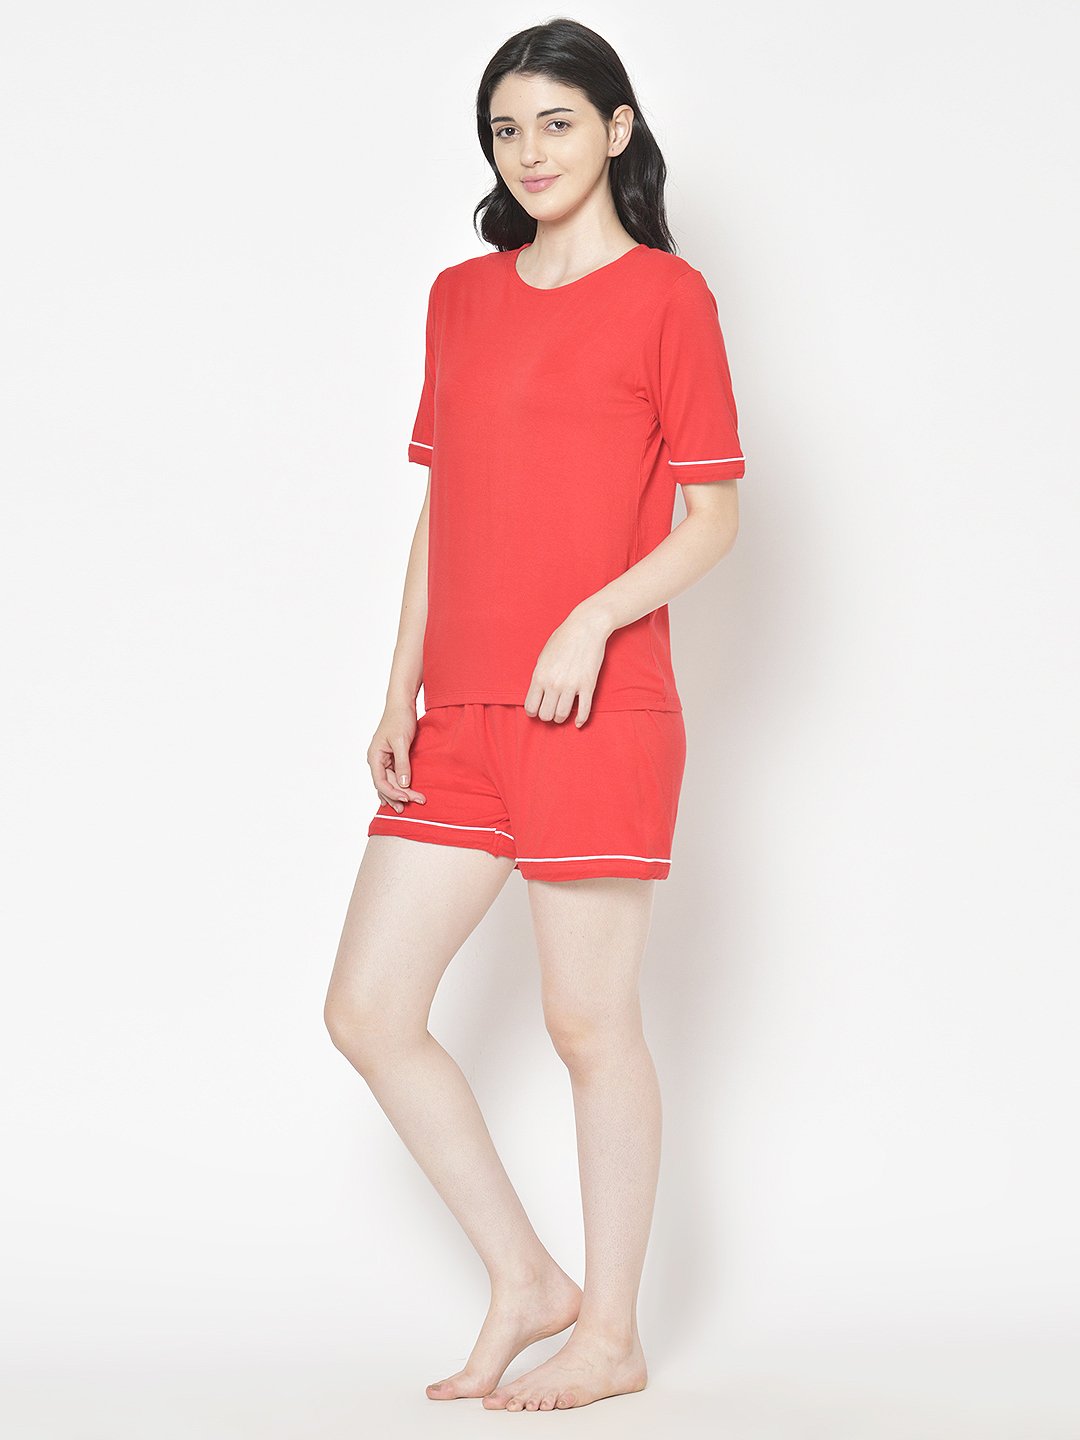 Cation Red Solid Night Suit